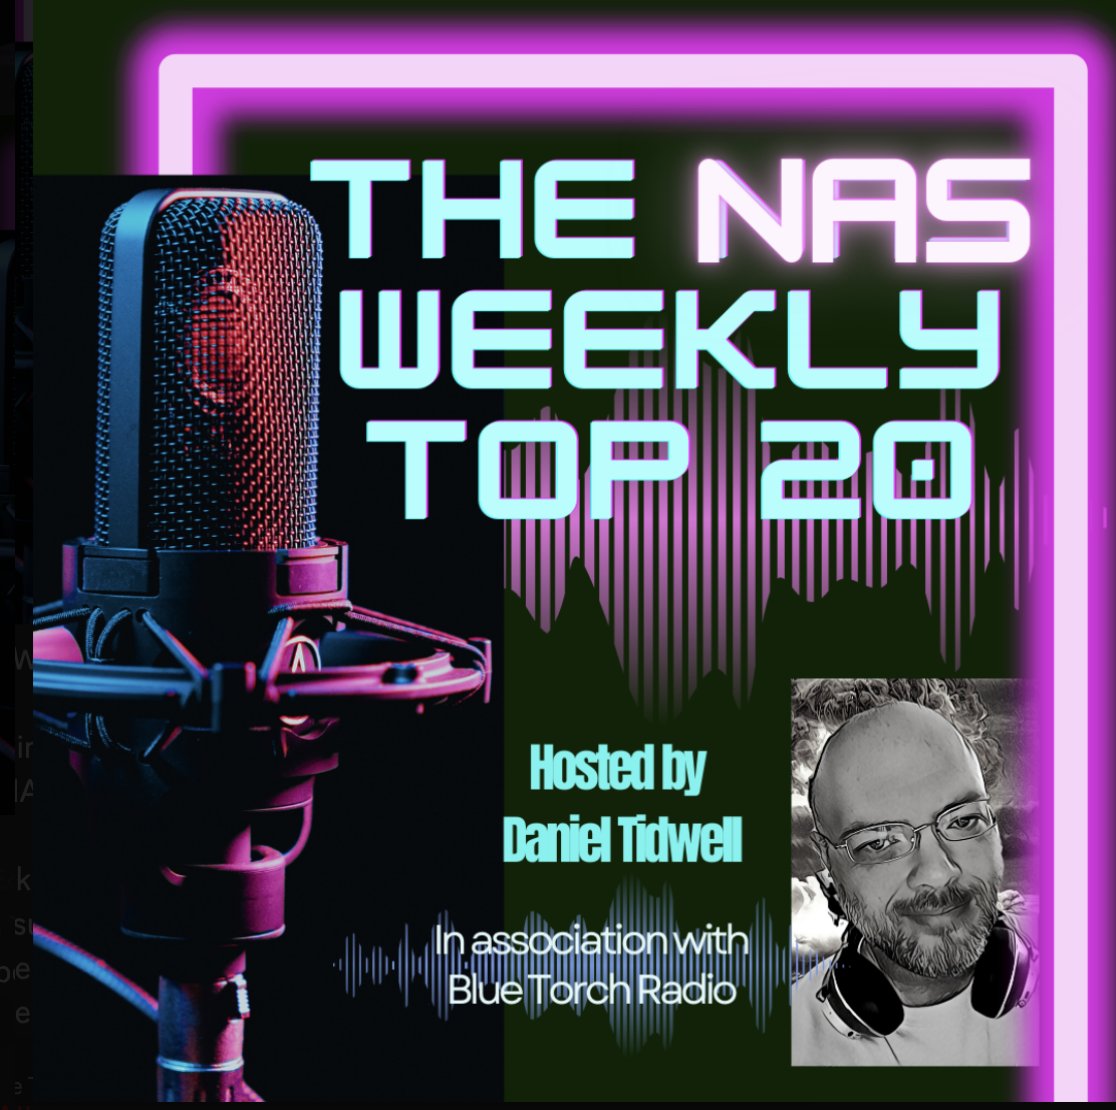 The NAS Top 20 Hosted by @DanielTidwell14 in association with Blue Torch Radio Pick Their Skullz' @LizJamesMusic, Todays guest Ed Eagle @edeagle89 Check it out 4 PM UK / Noon ET / 9 AM PT bluetorchradio.com #iwantmynas #StopPayola